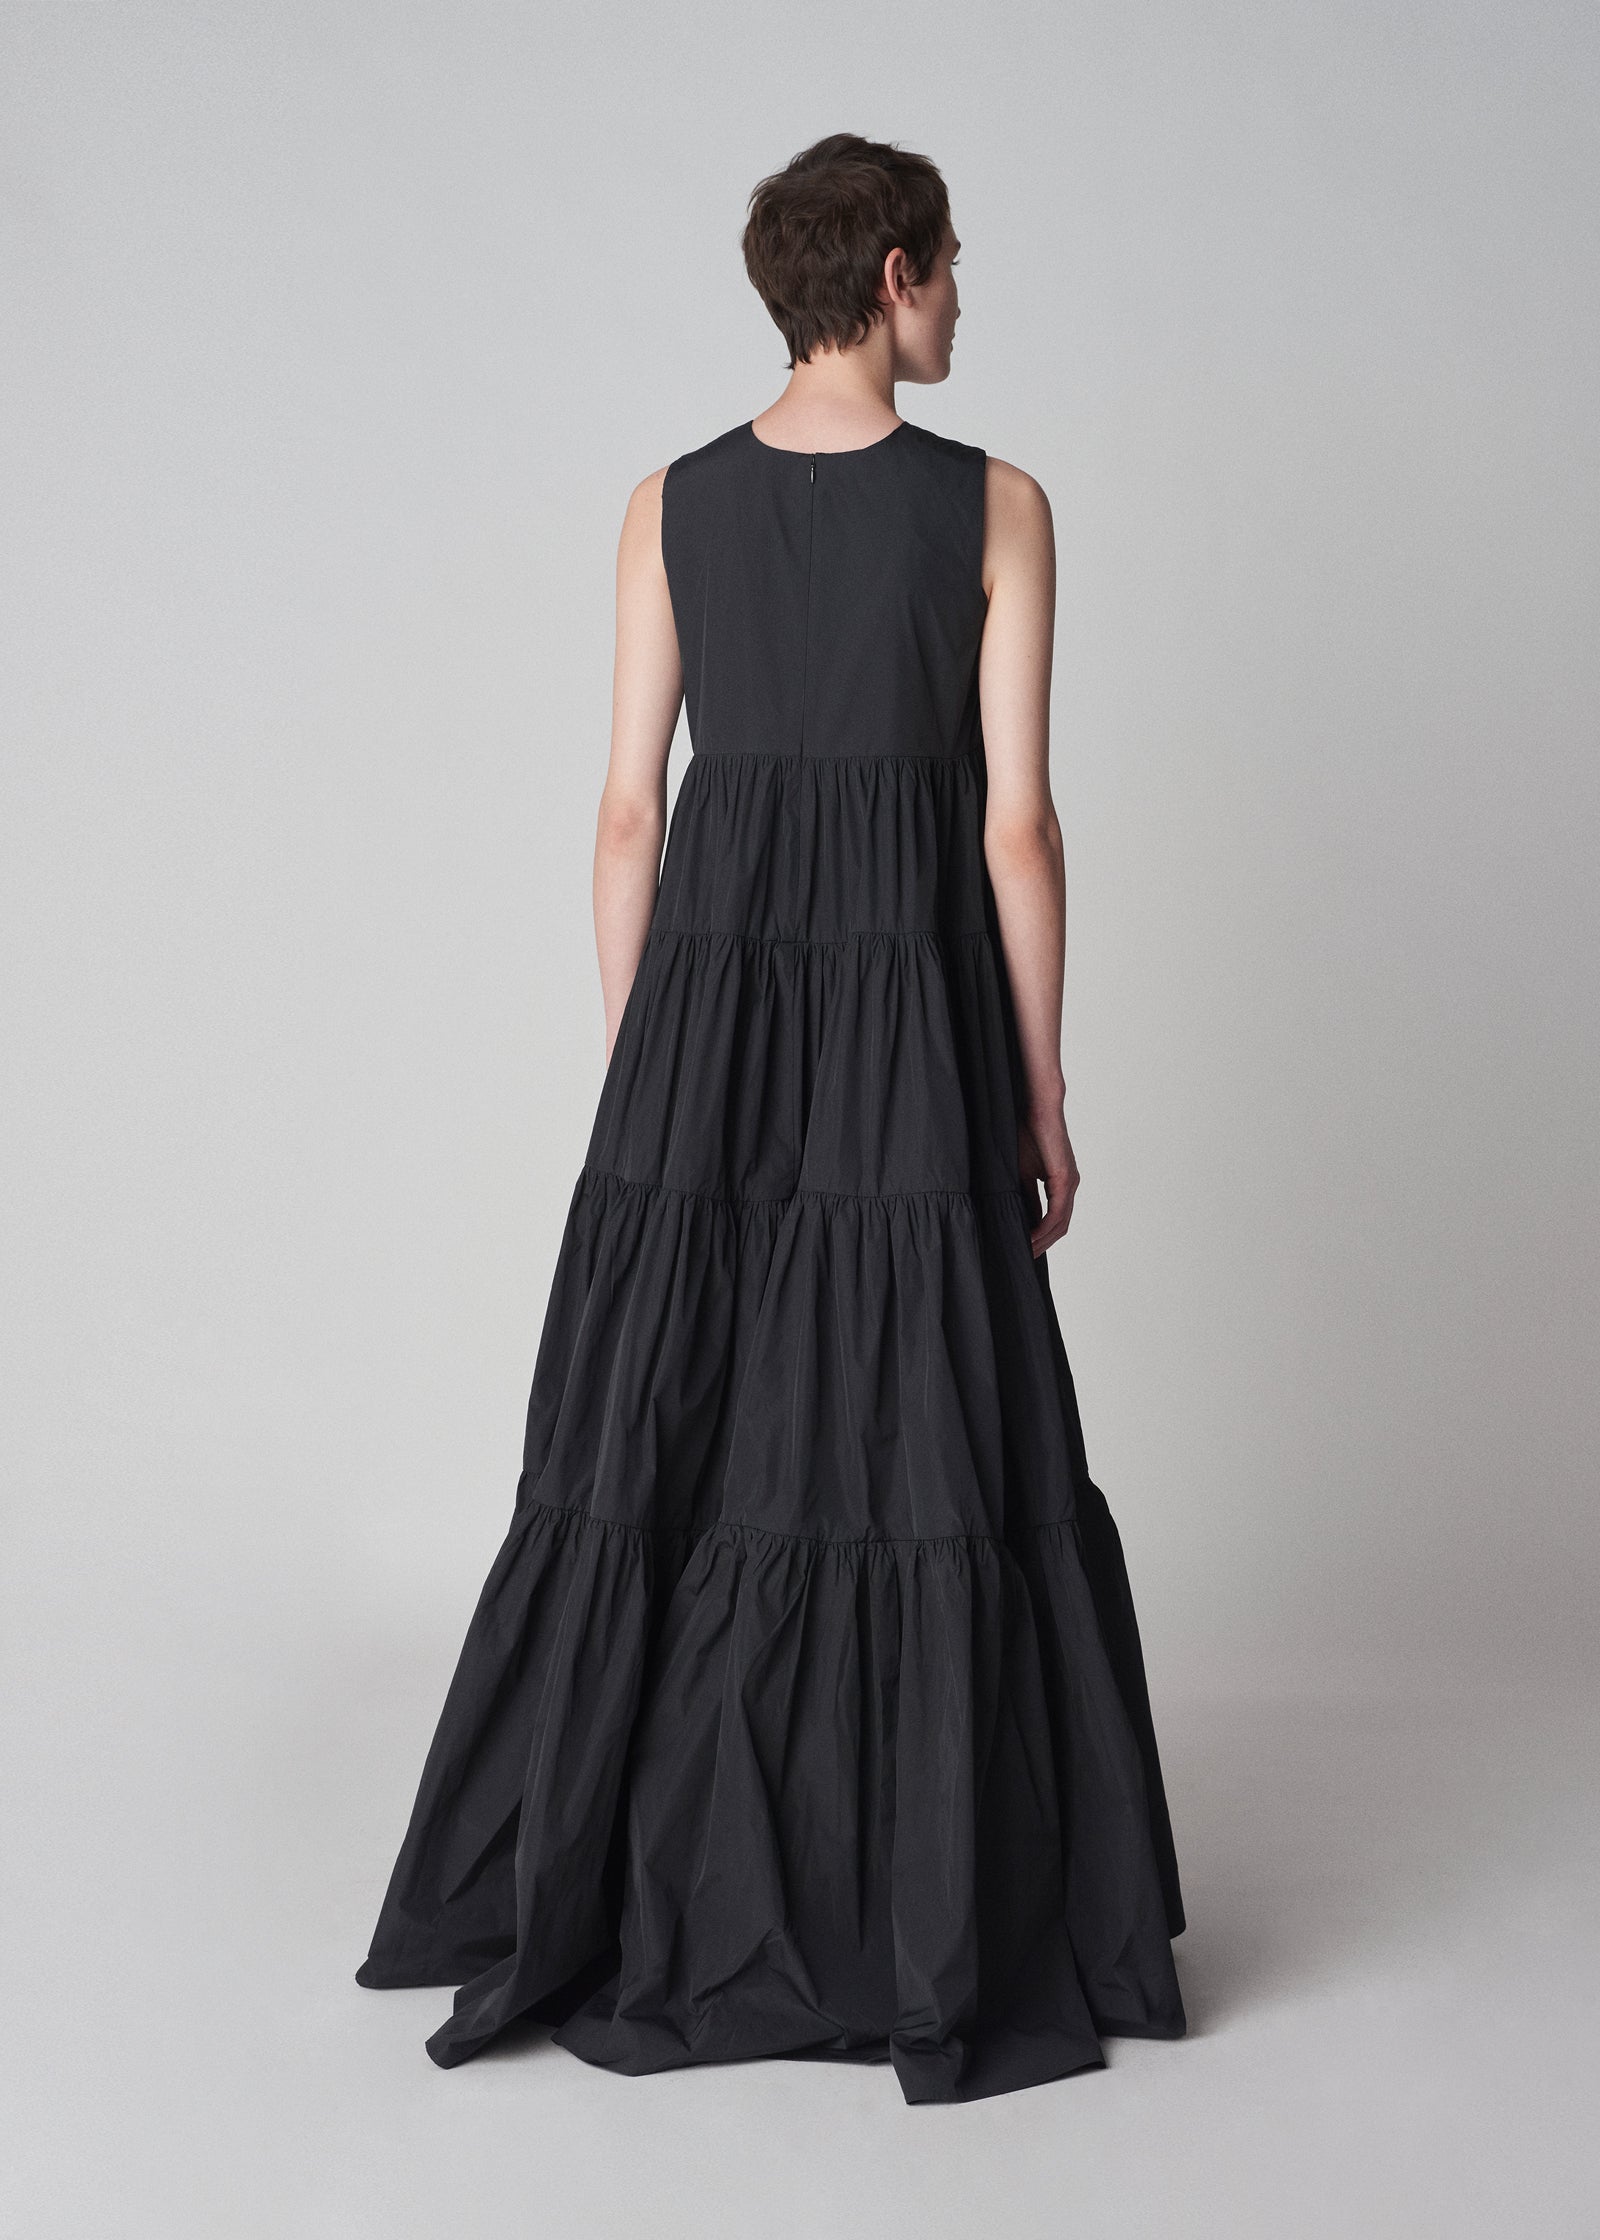 Tiered Long Dress in Taffeta - Black - CO Collections